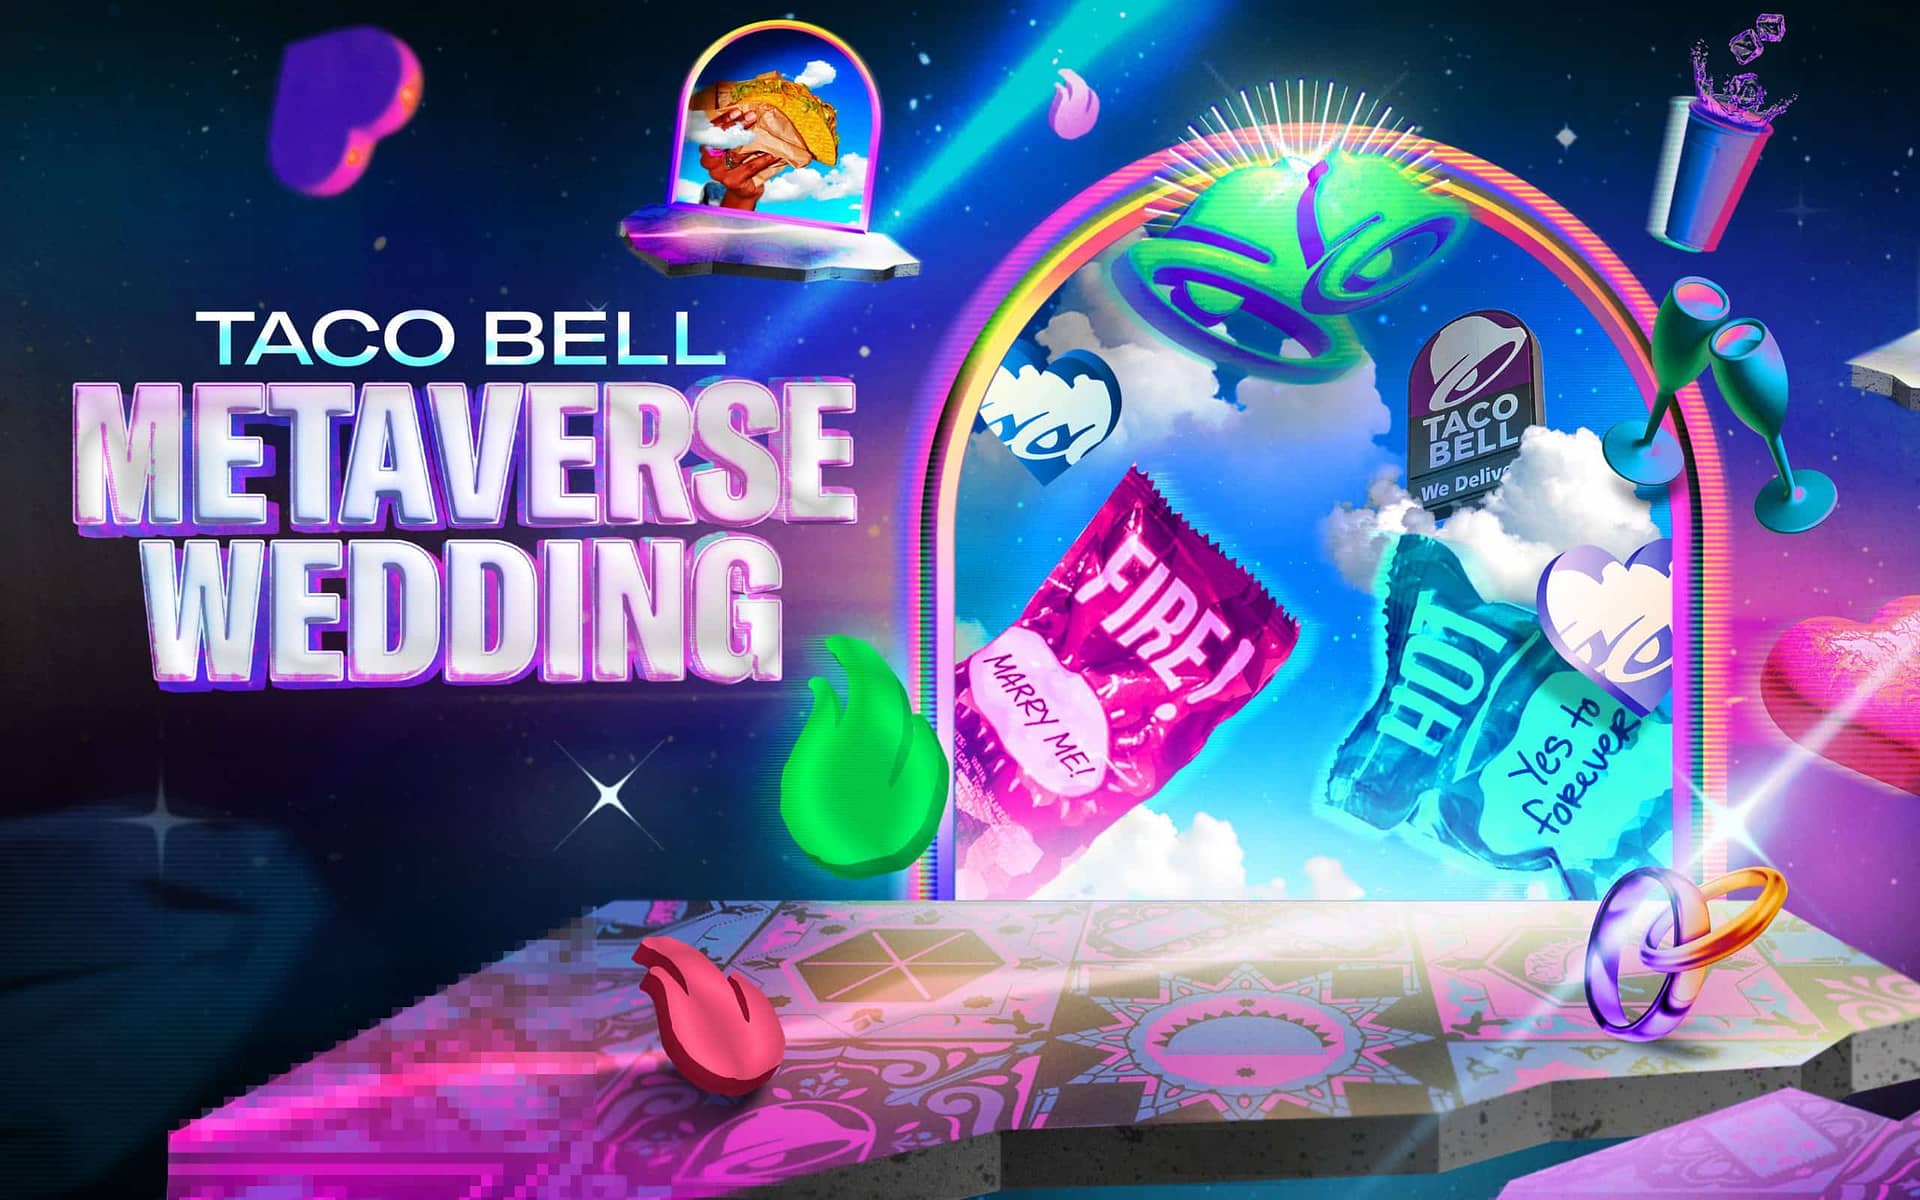 Taco Bell Metaverse Wedding poster showing a virtual stage with rings